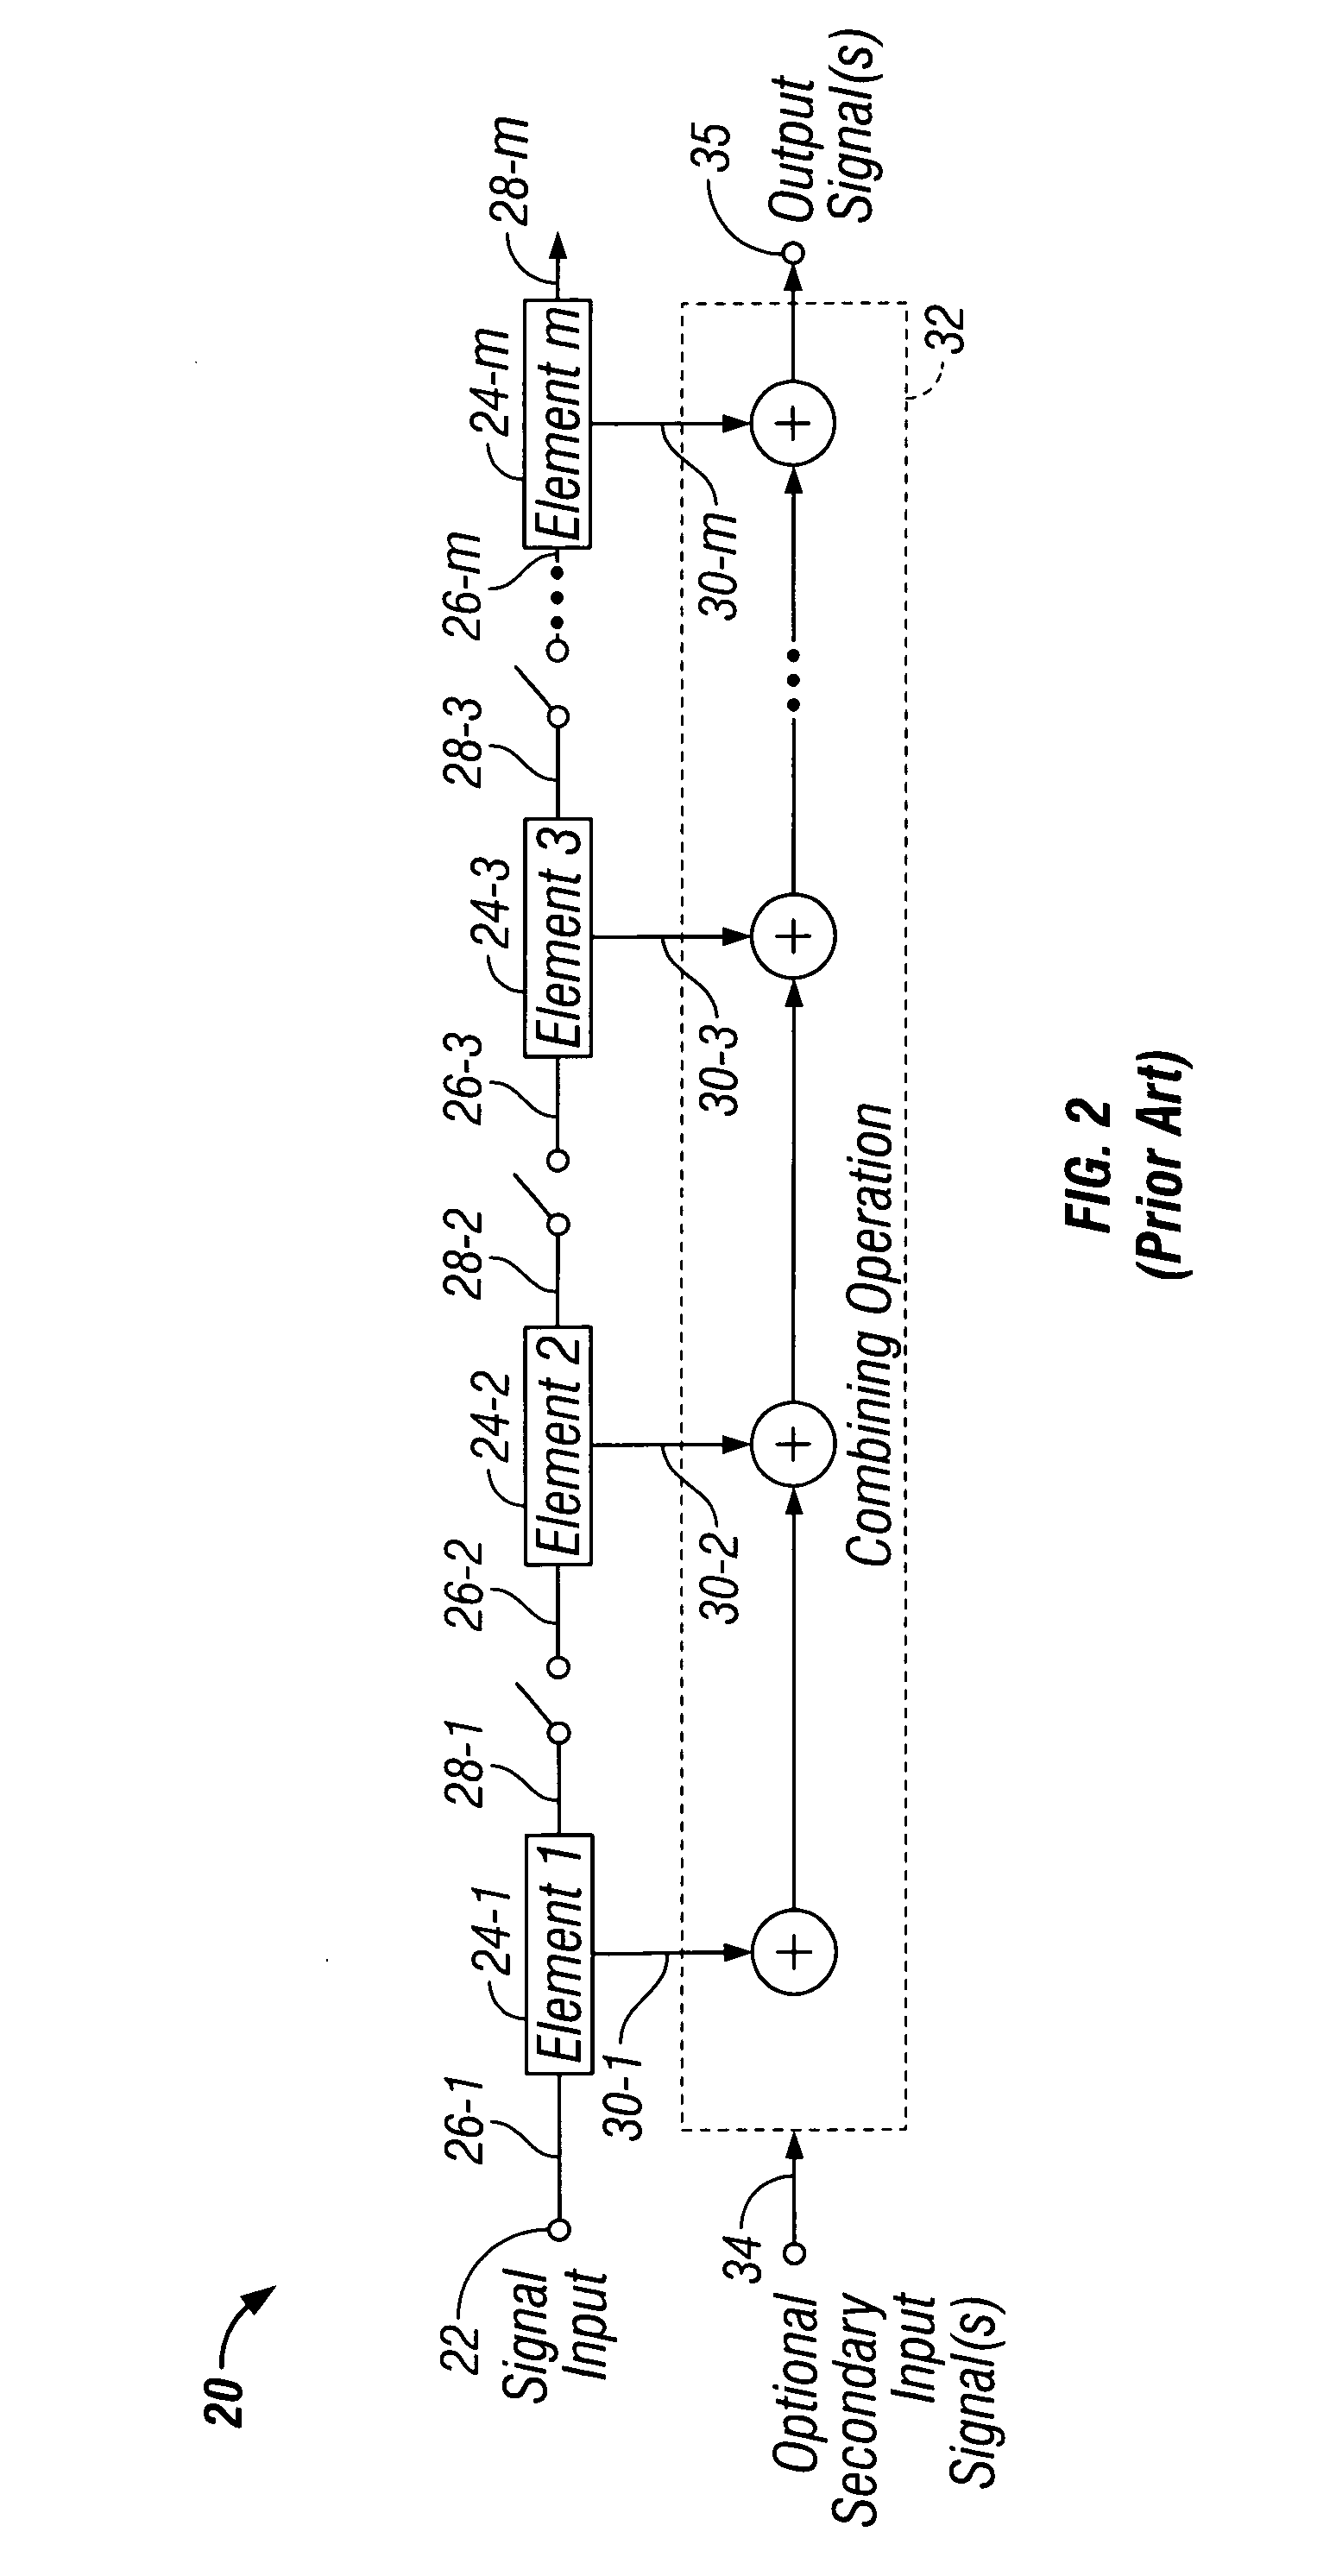 Use of analog-valued floating-gate transistors to match the electrical characteristics of interleaved and pipelined circuits